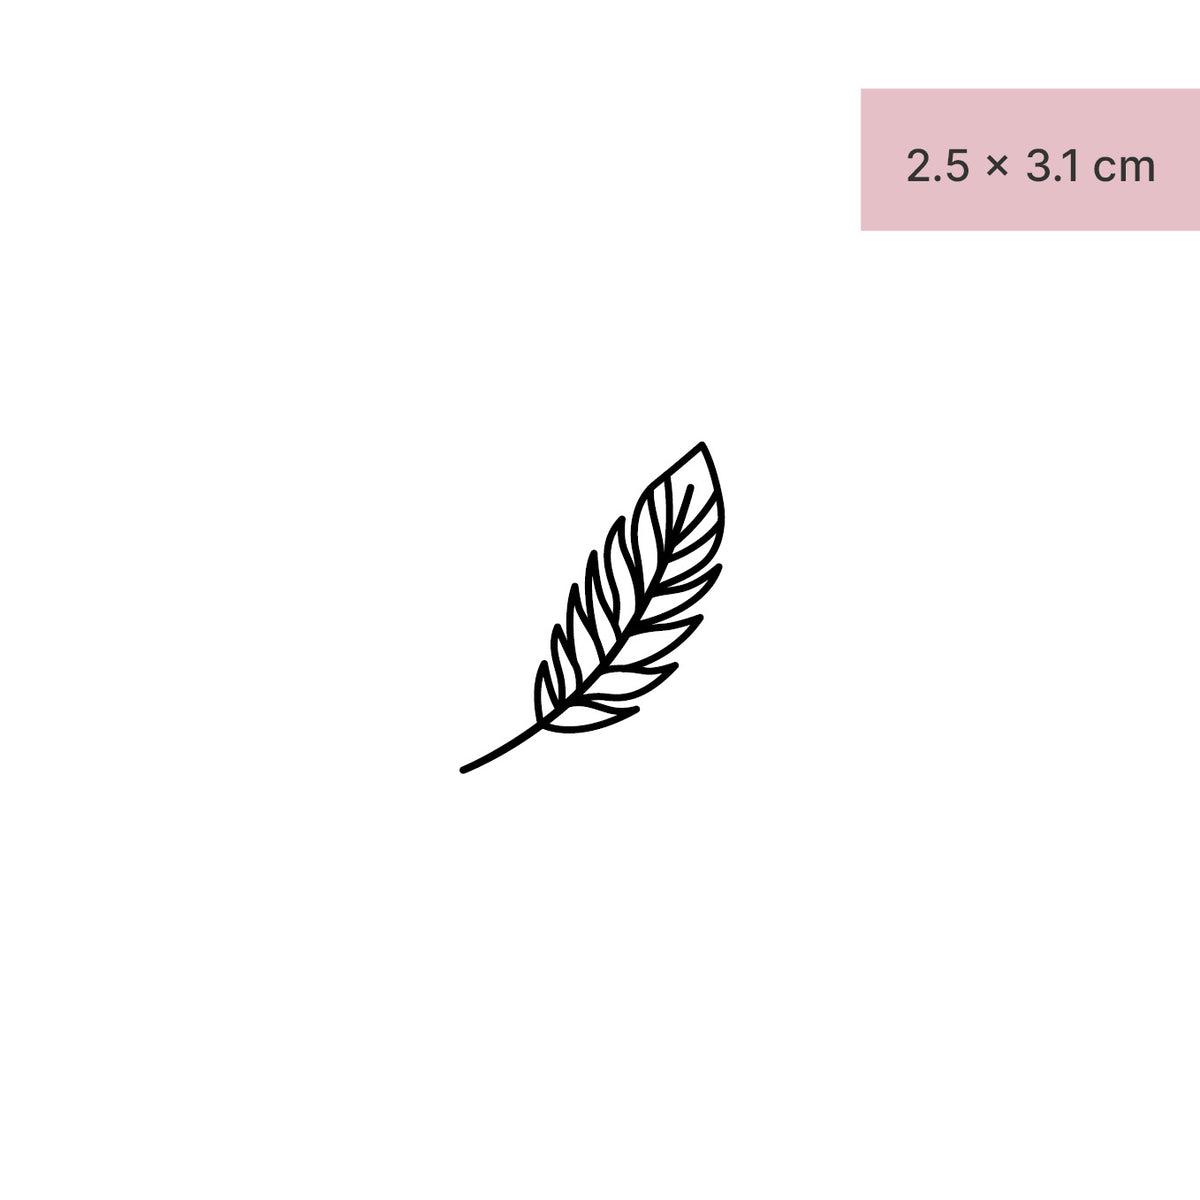 70,392 White Feather Tattoo Images, Stock Photos, 3D objects, & Vectors |  Shutterstock